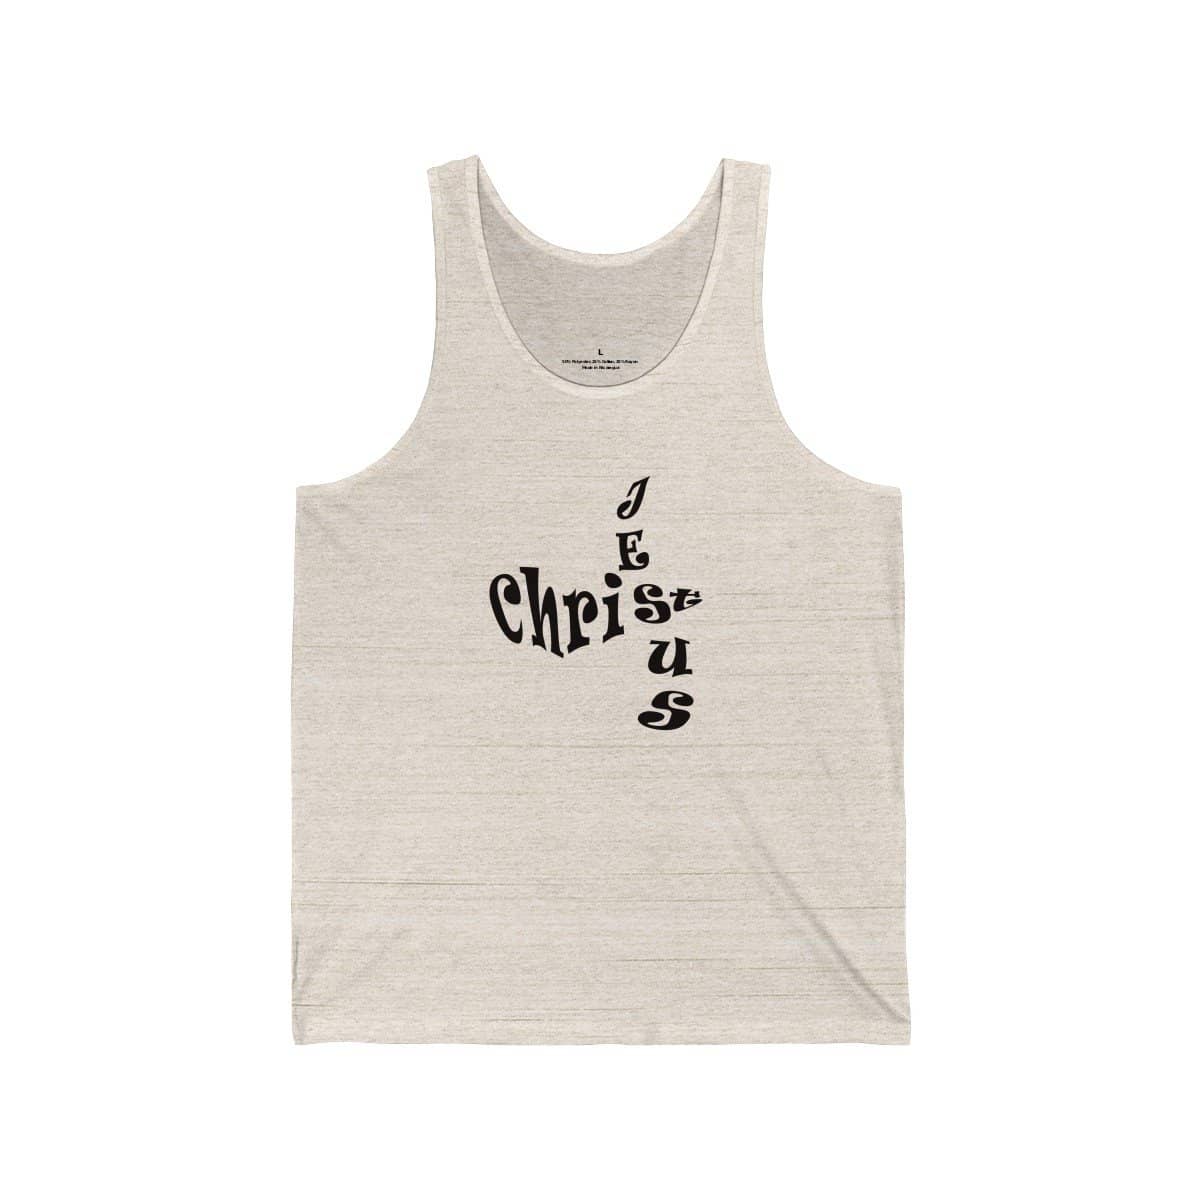 Bella &amp; Canvas 3480 Jersey Tank &quot;Jesus Christ&quot; in 17 Colors and 6 Sizes (3556781949028)